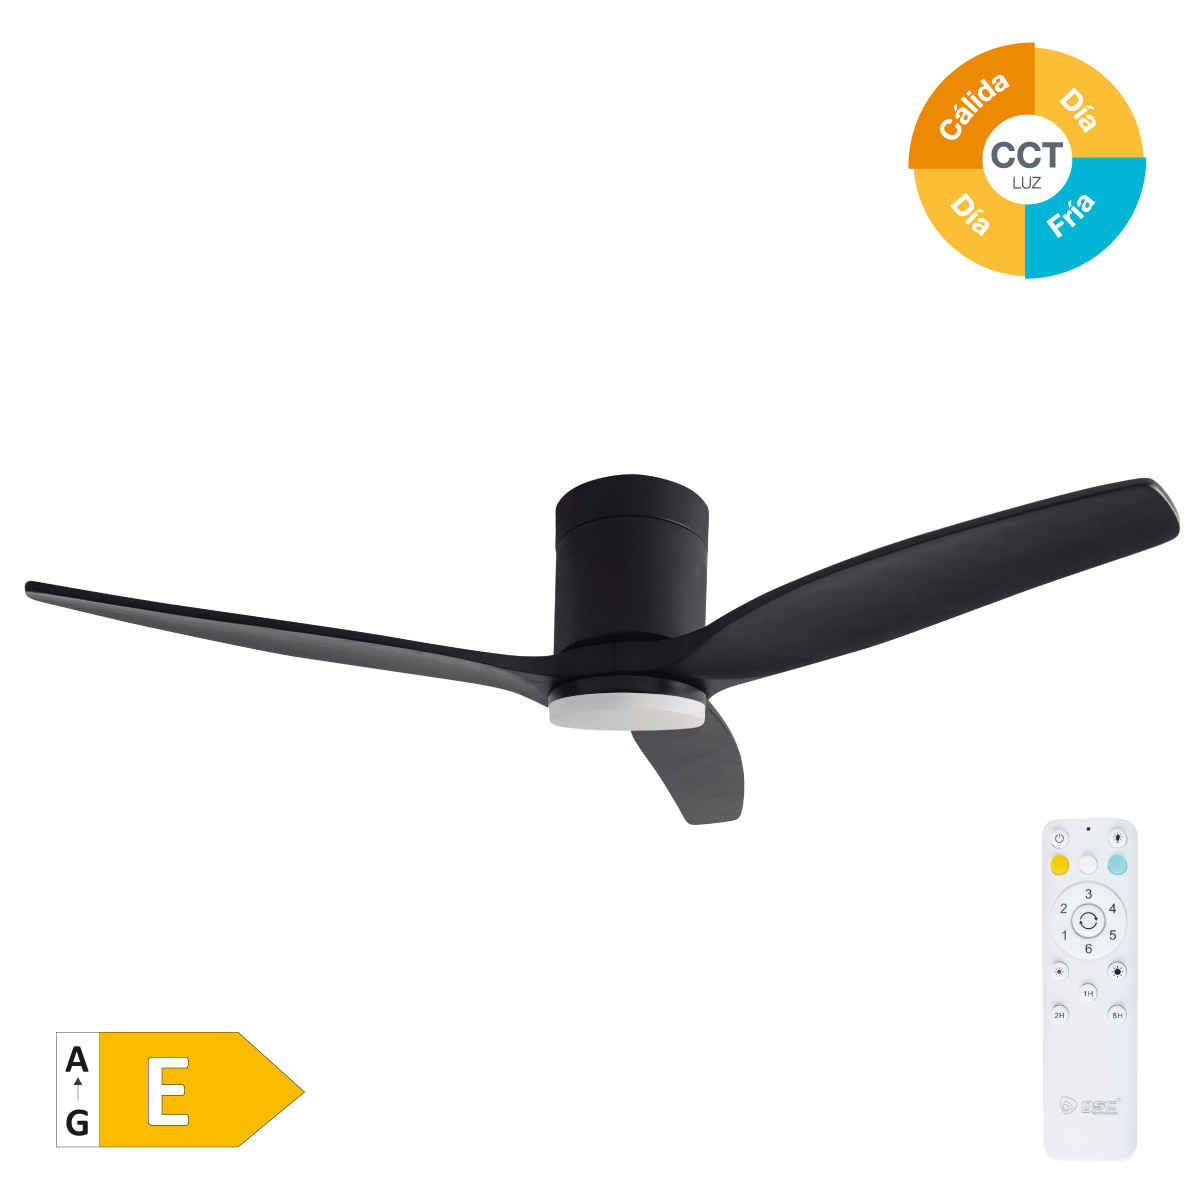 Kasama 52' DC ceiling fan with remote control CCT 3 blades dimmeable Black/Wood